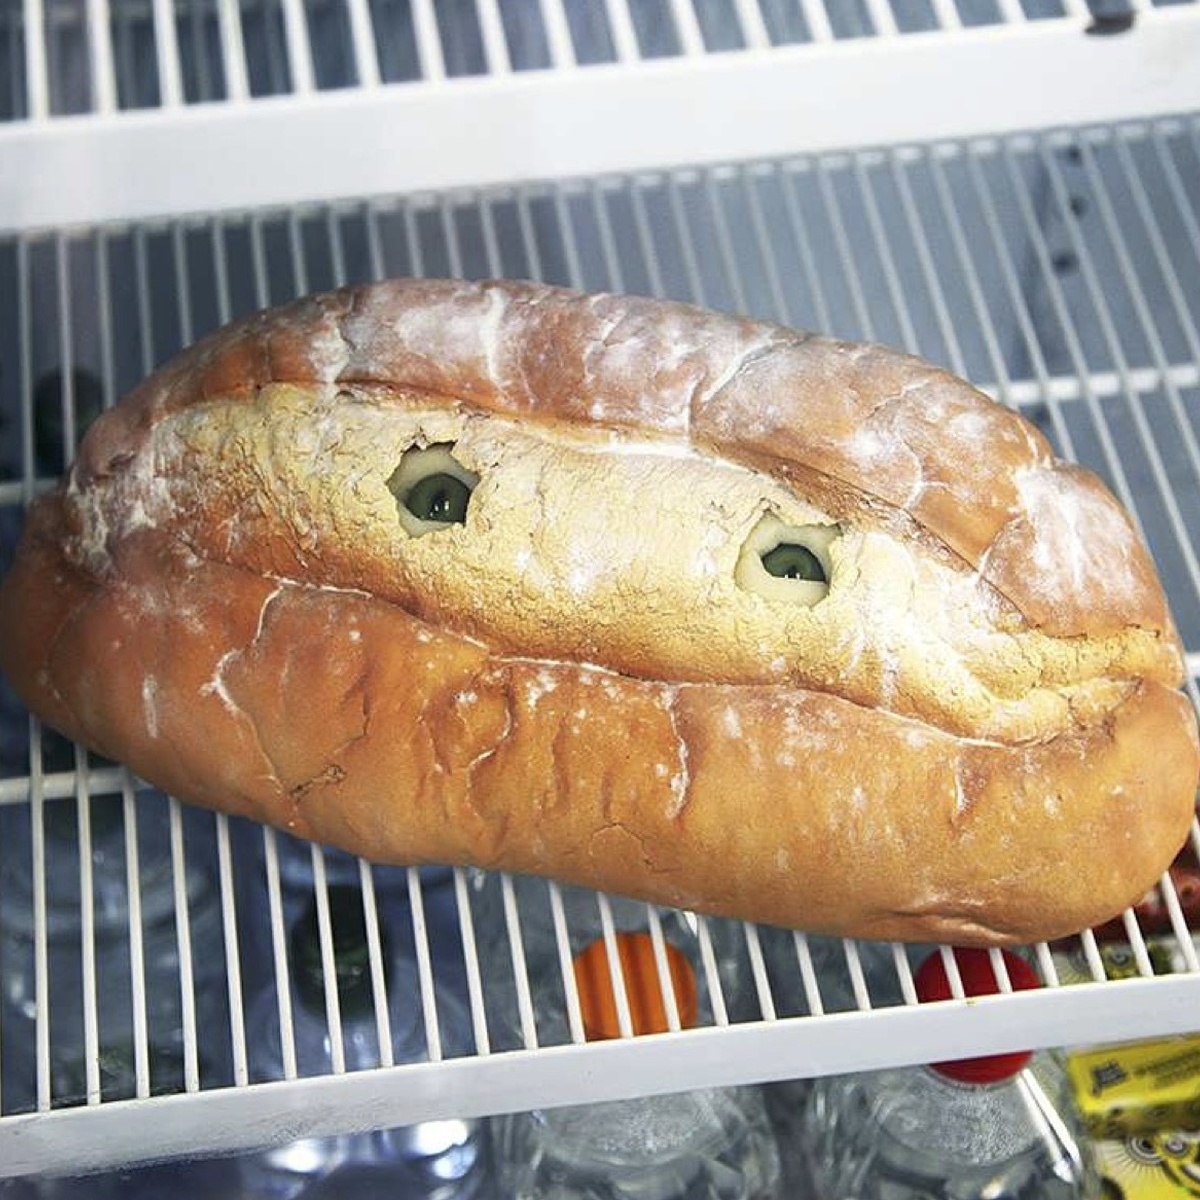 A sculpture that looks like a loaf of bread. Two beady eyes peer out from the middle.